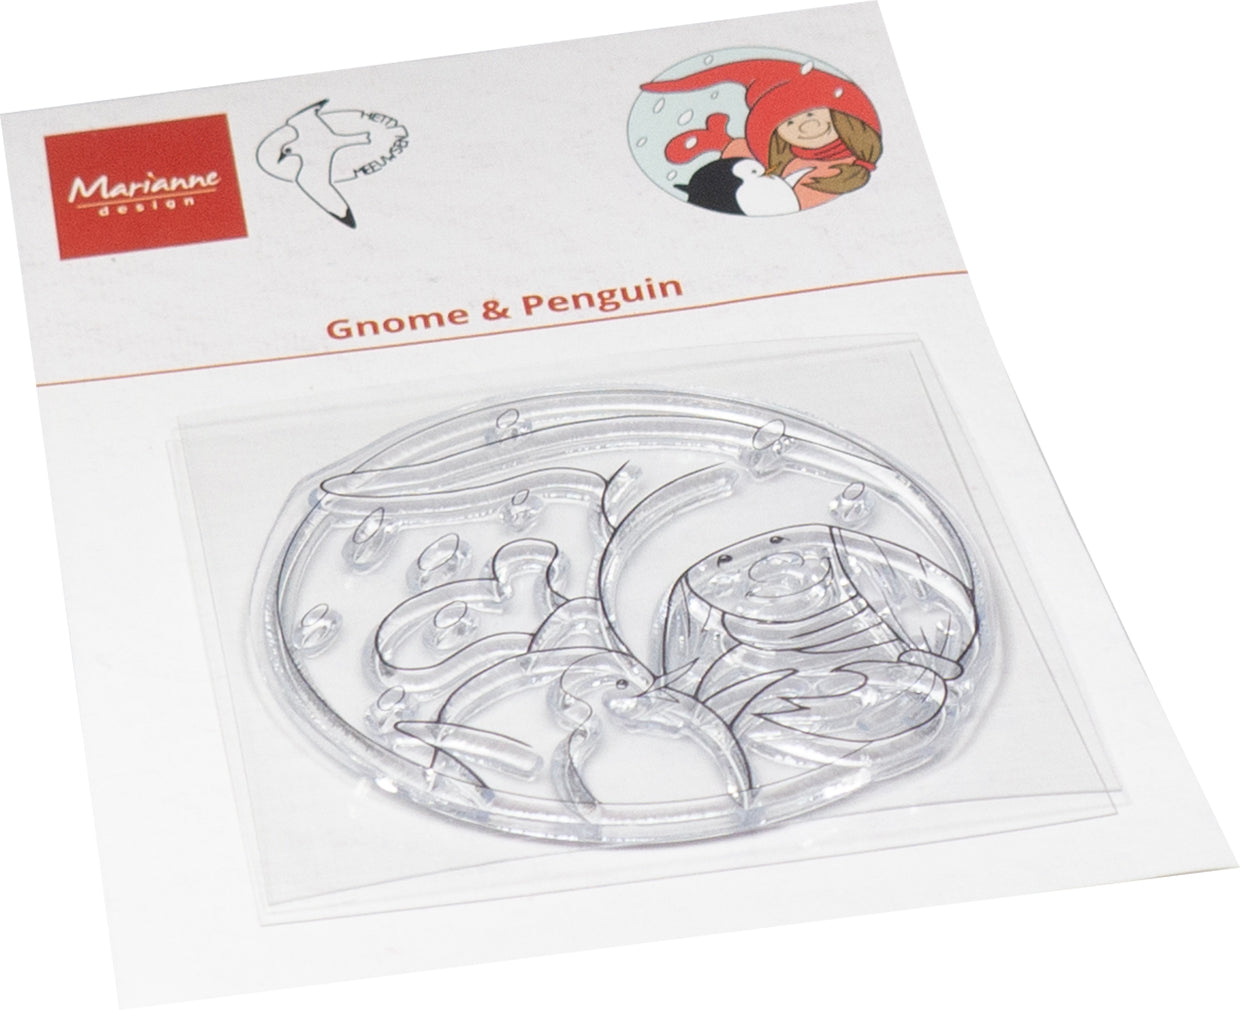 Marianne Design Clear Stamp - Hetty's Gnome & Penguin